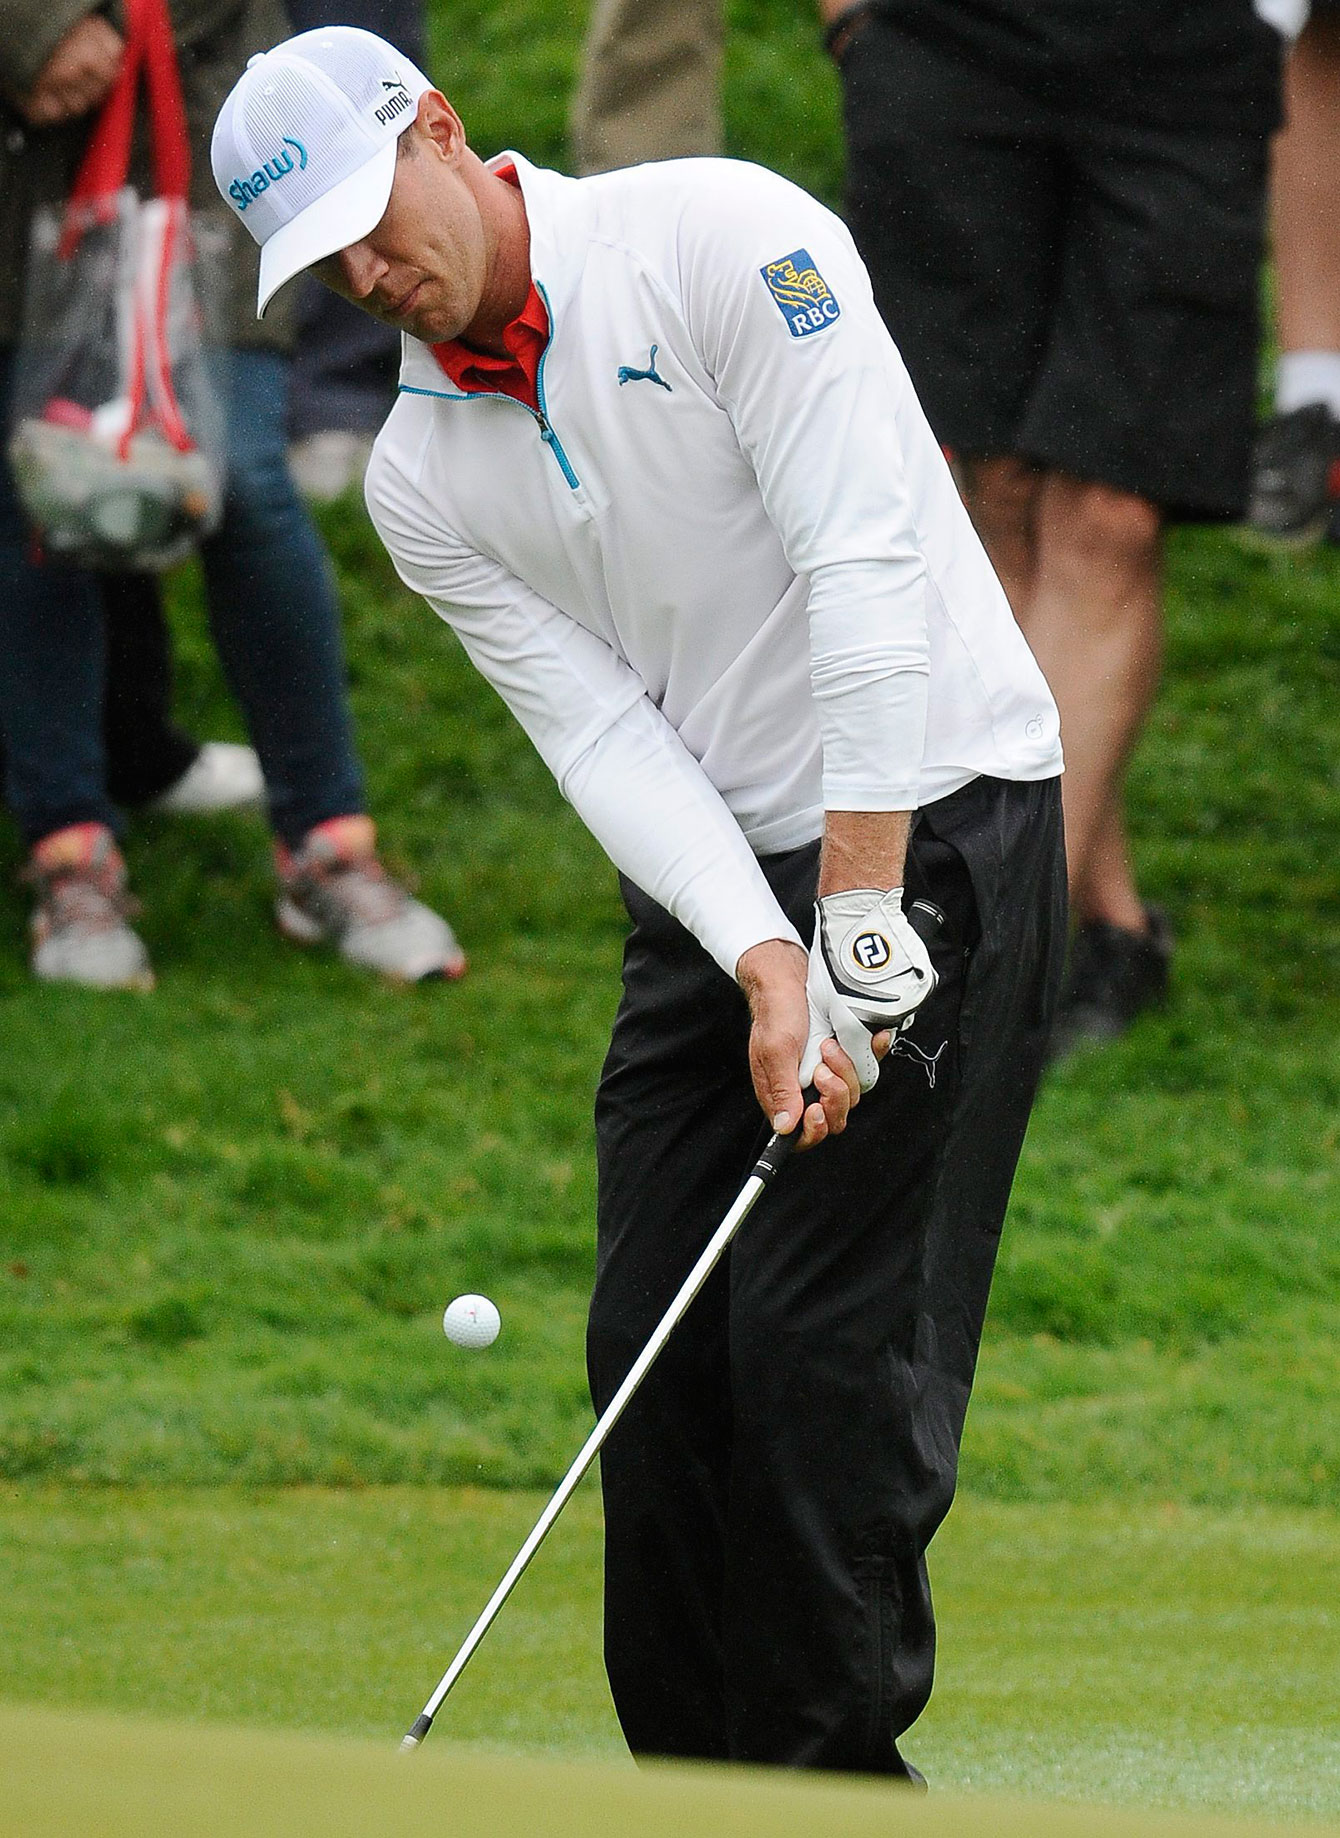 Graham DeLaet at the Travelers Championship in Connecticut on June 28, 2015. 